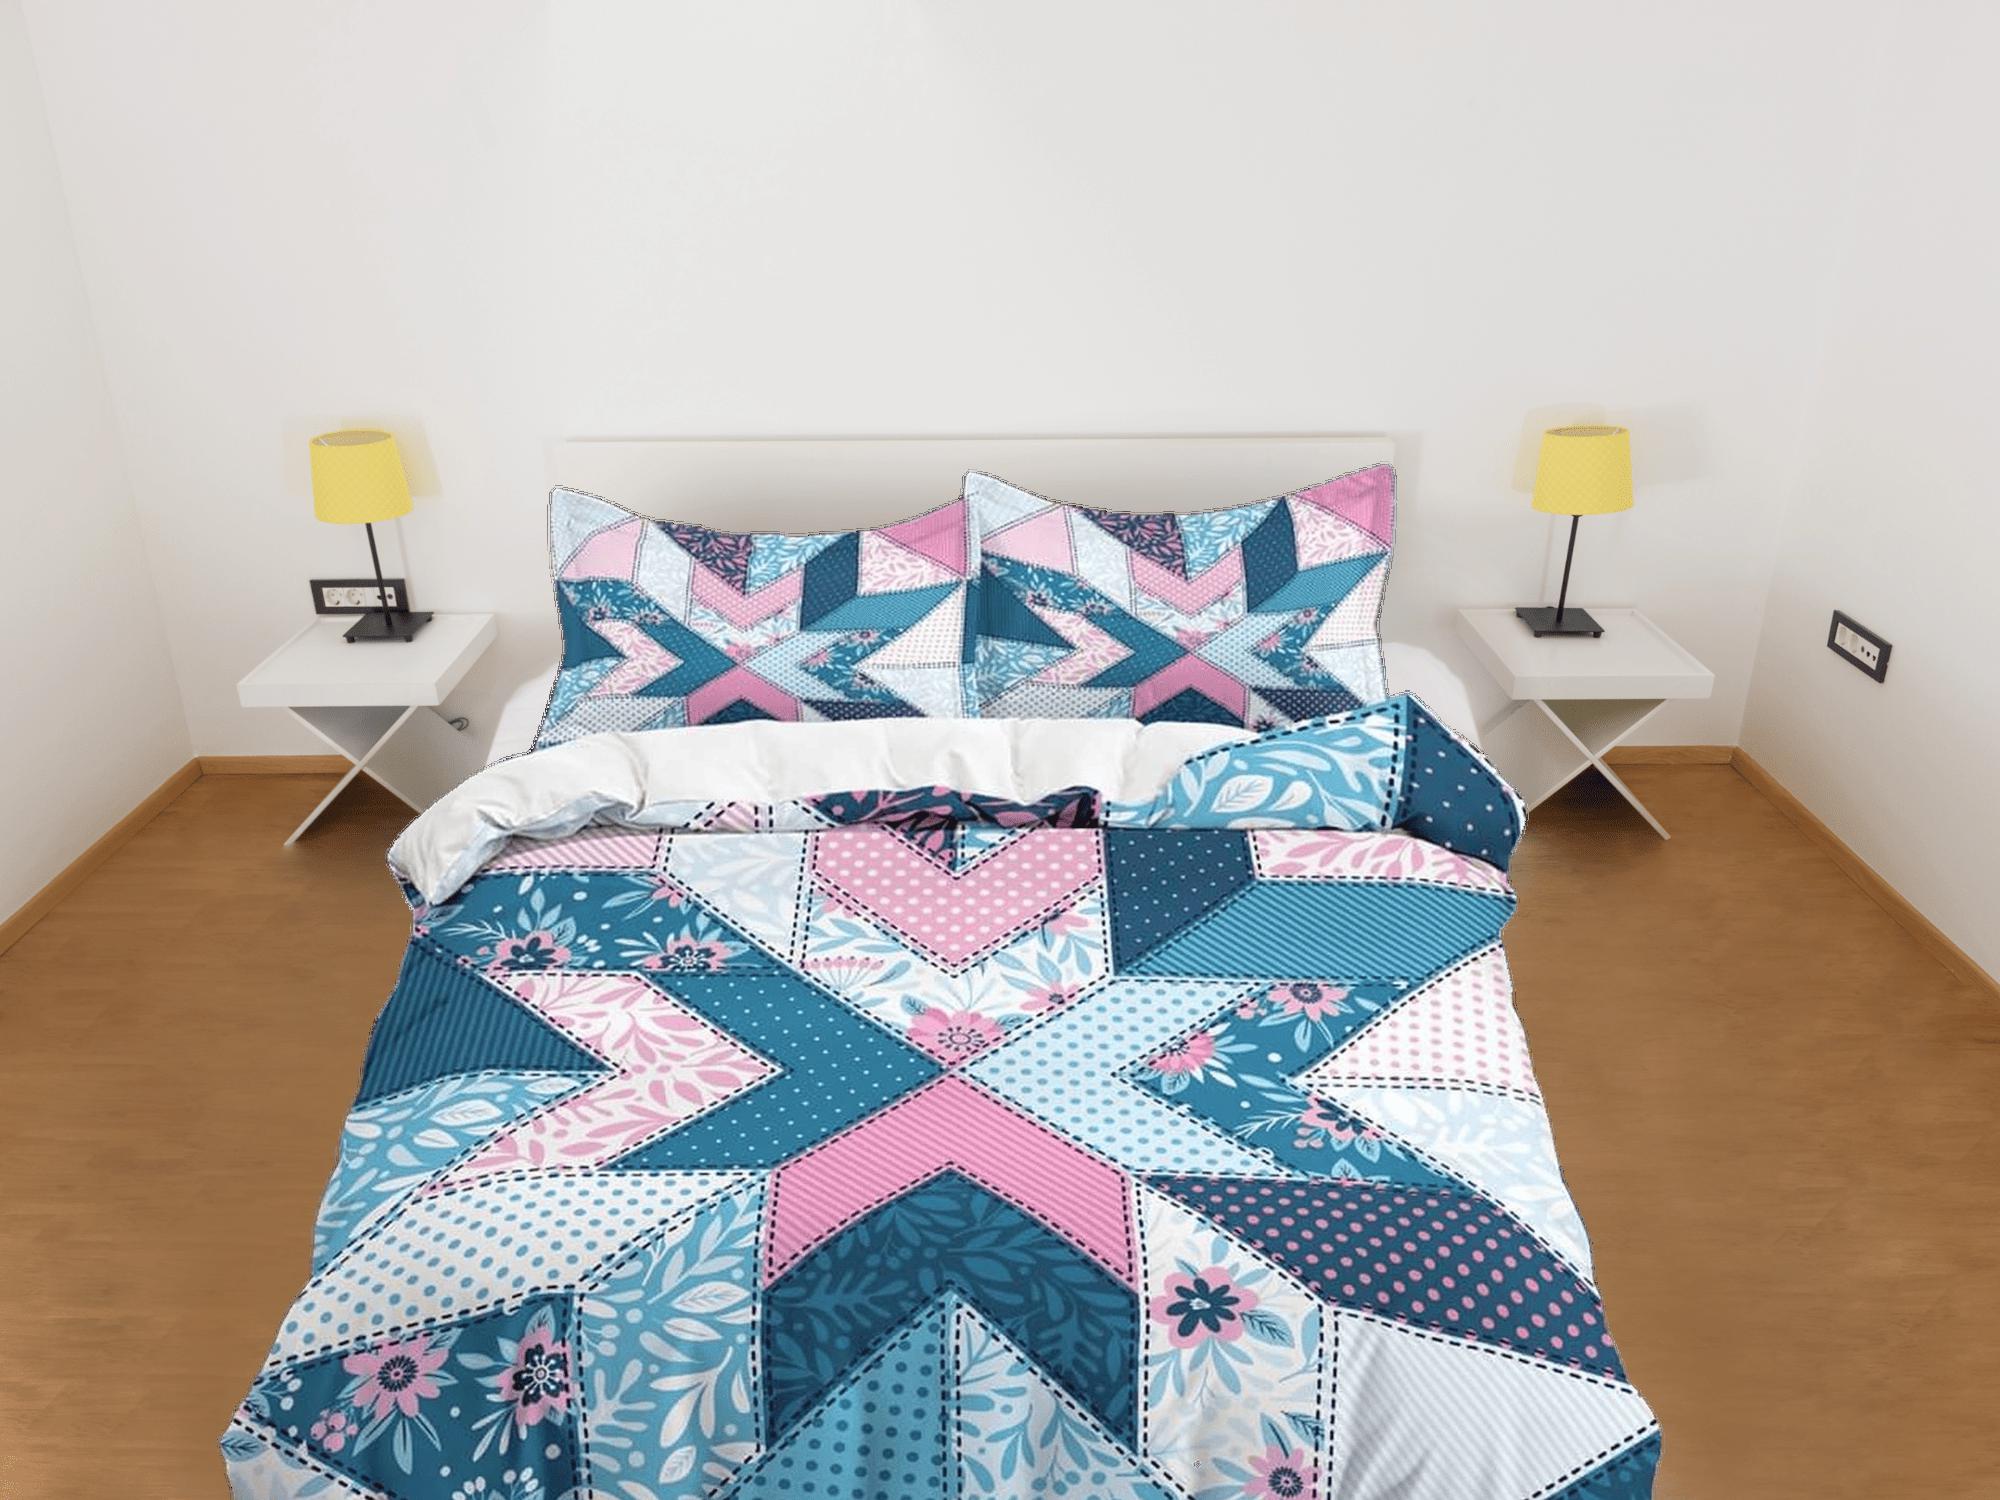 daintyduvet Blue pink crossover patchwork quilt printed duvet cover set, aesthetic decor bedding set full, king, queen size, boho bedspread shabby chic